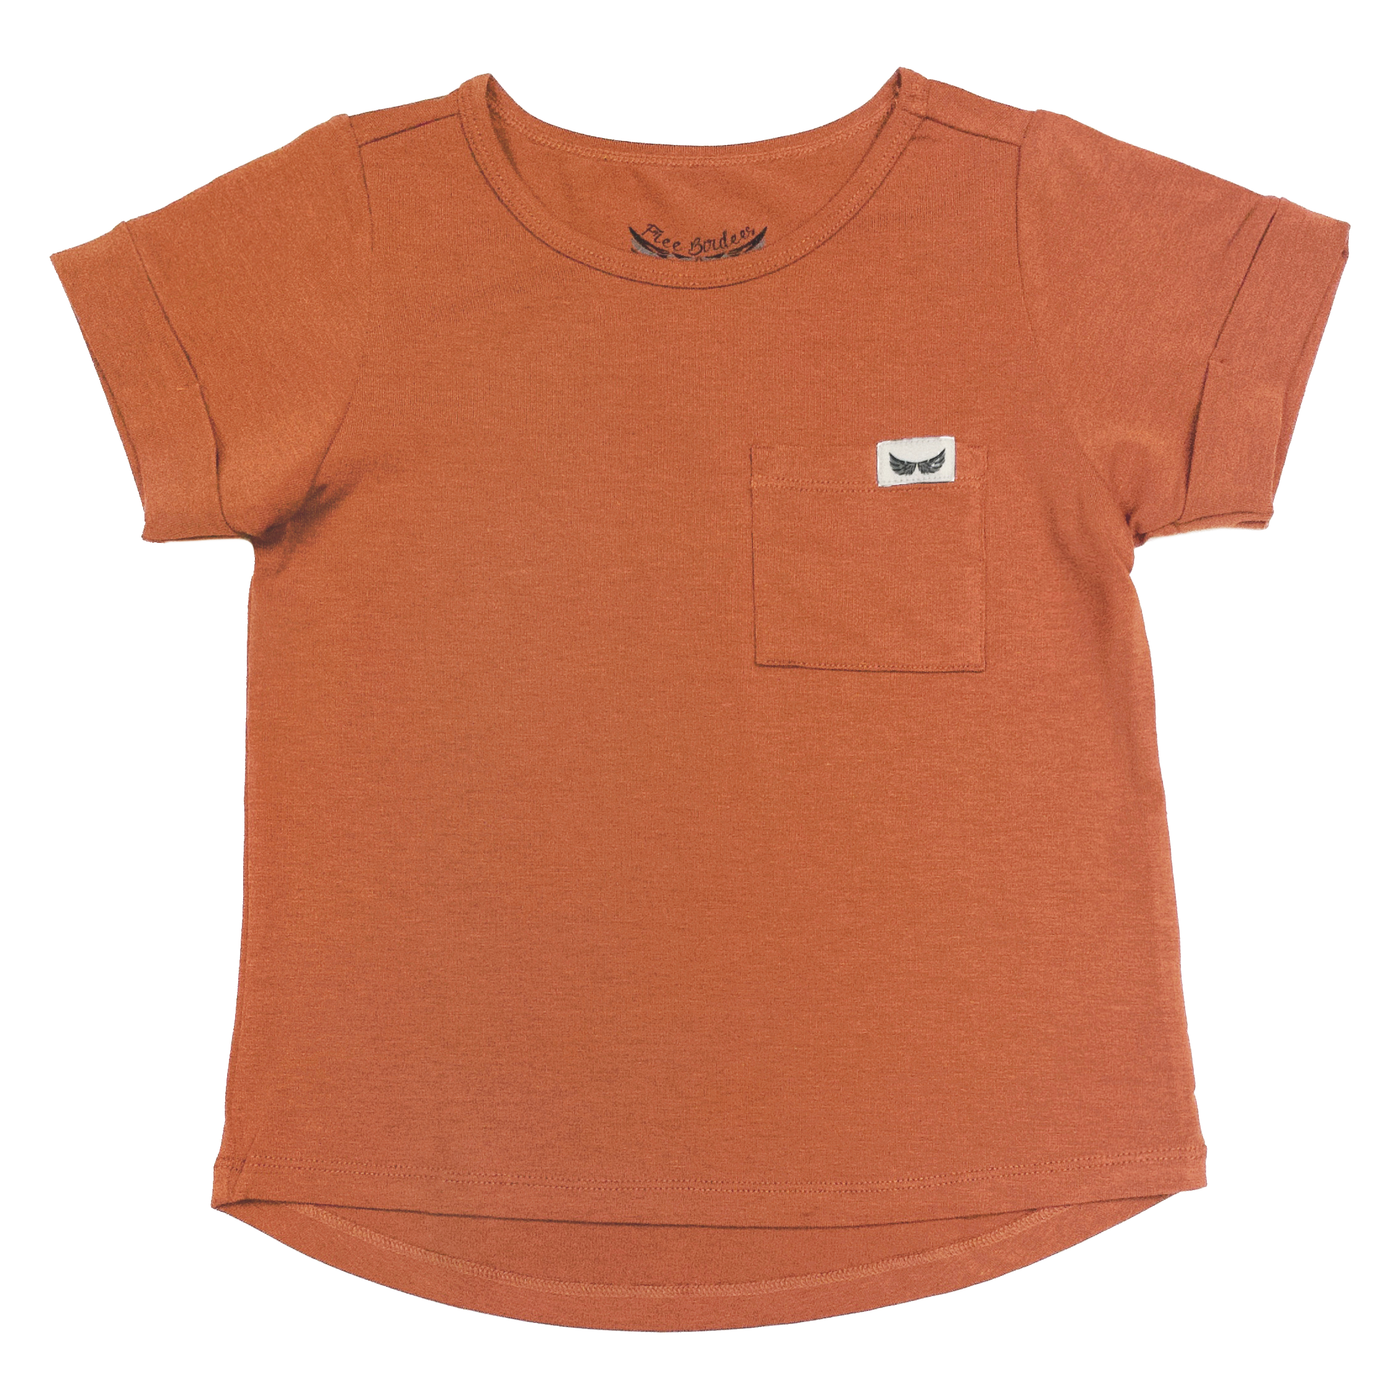 Highland Pocket Tee || Bamboo/Cotton/Spandex Jersey (18M-8Y)